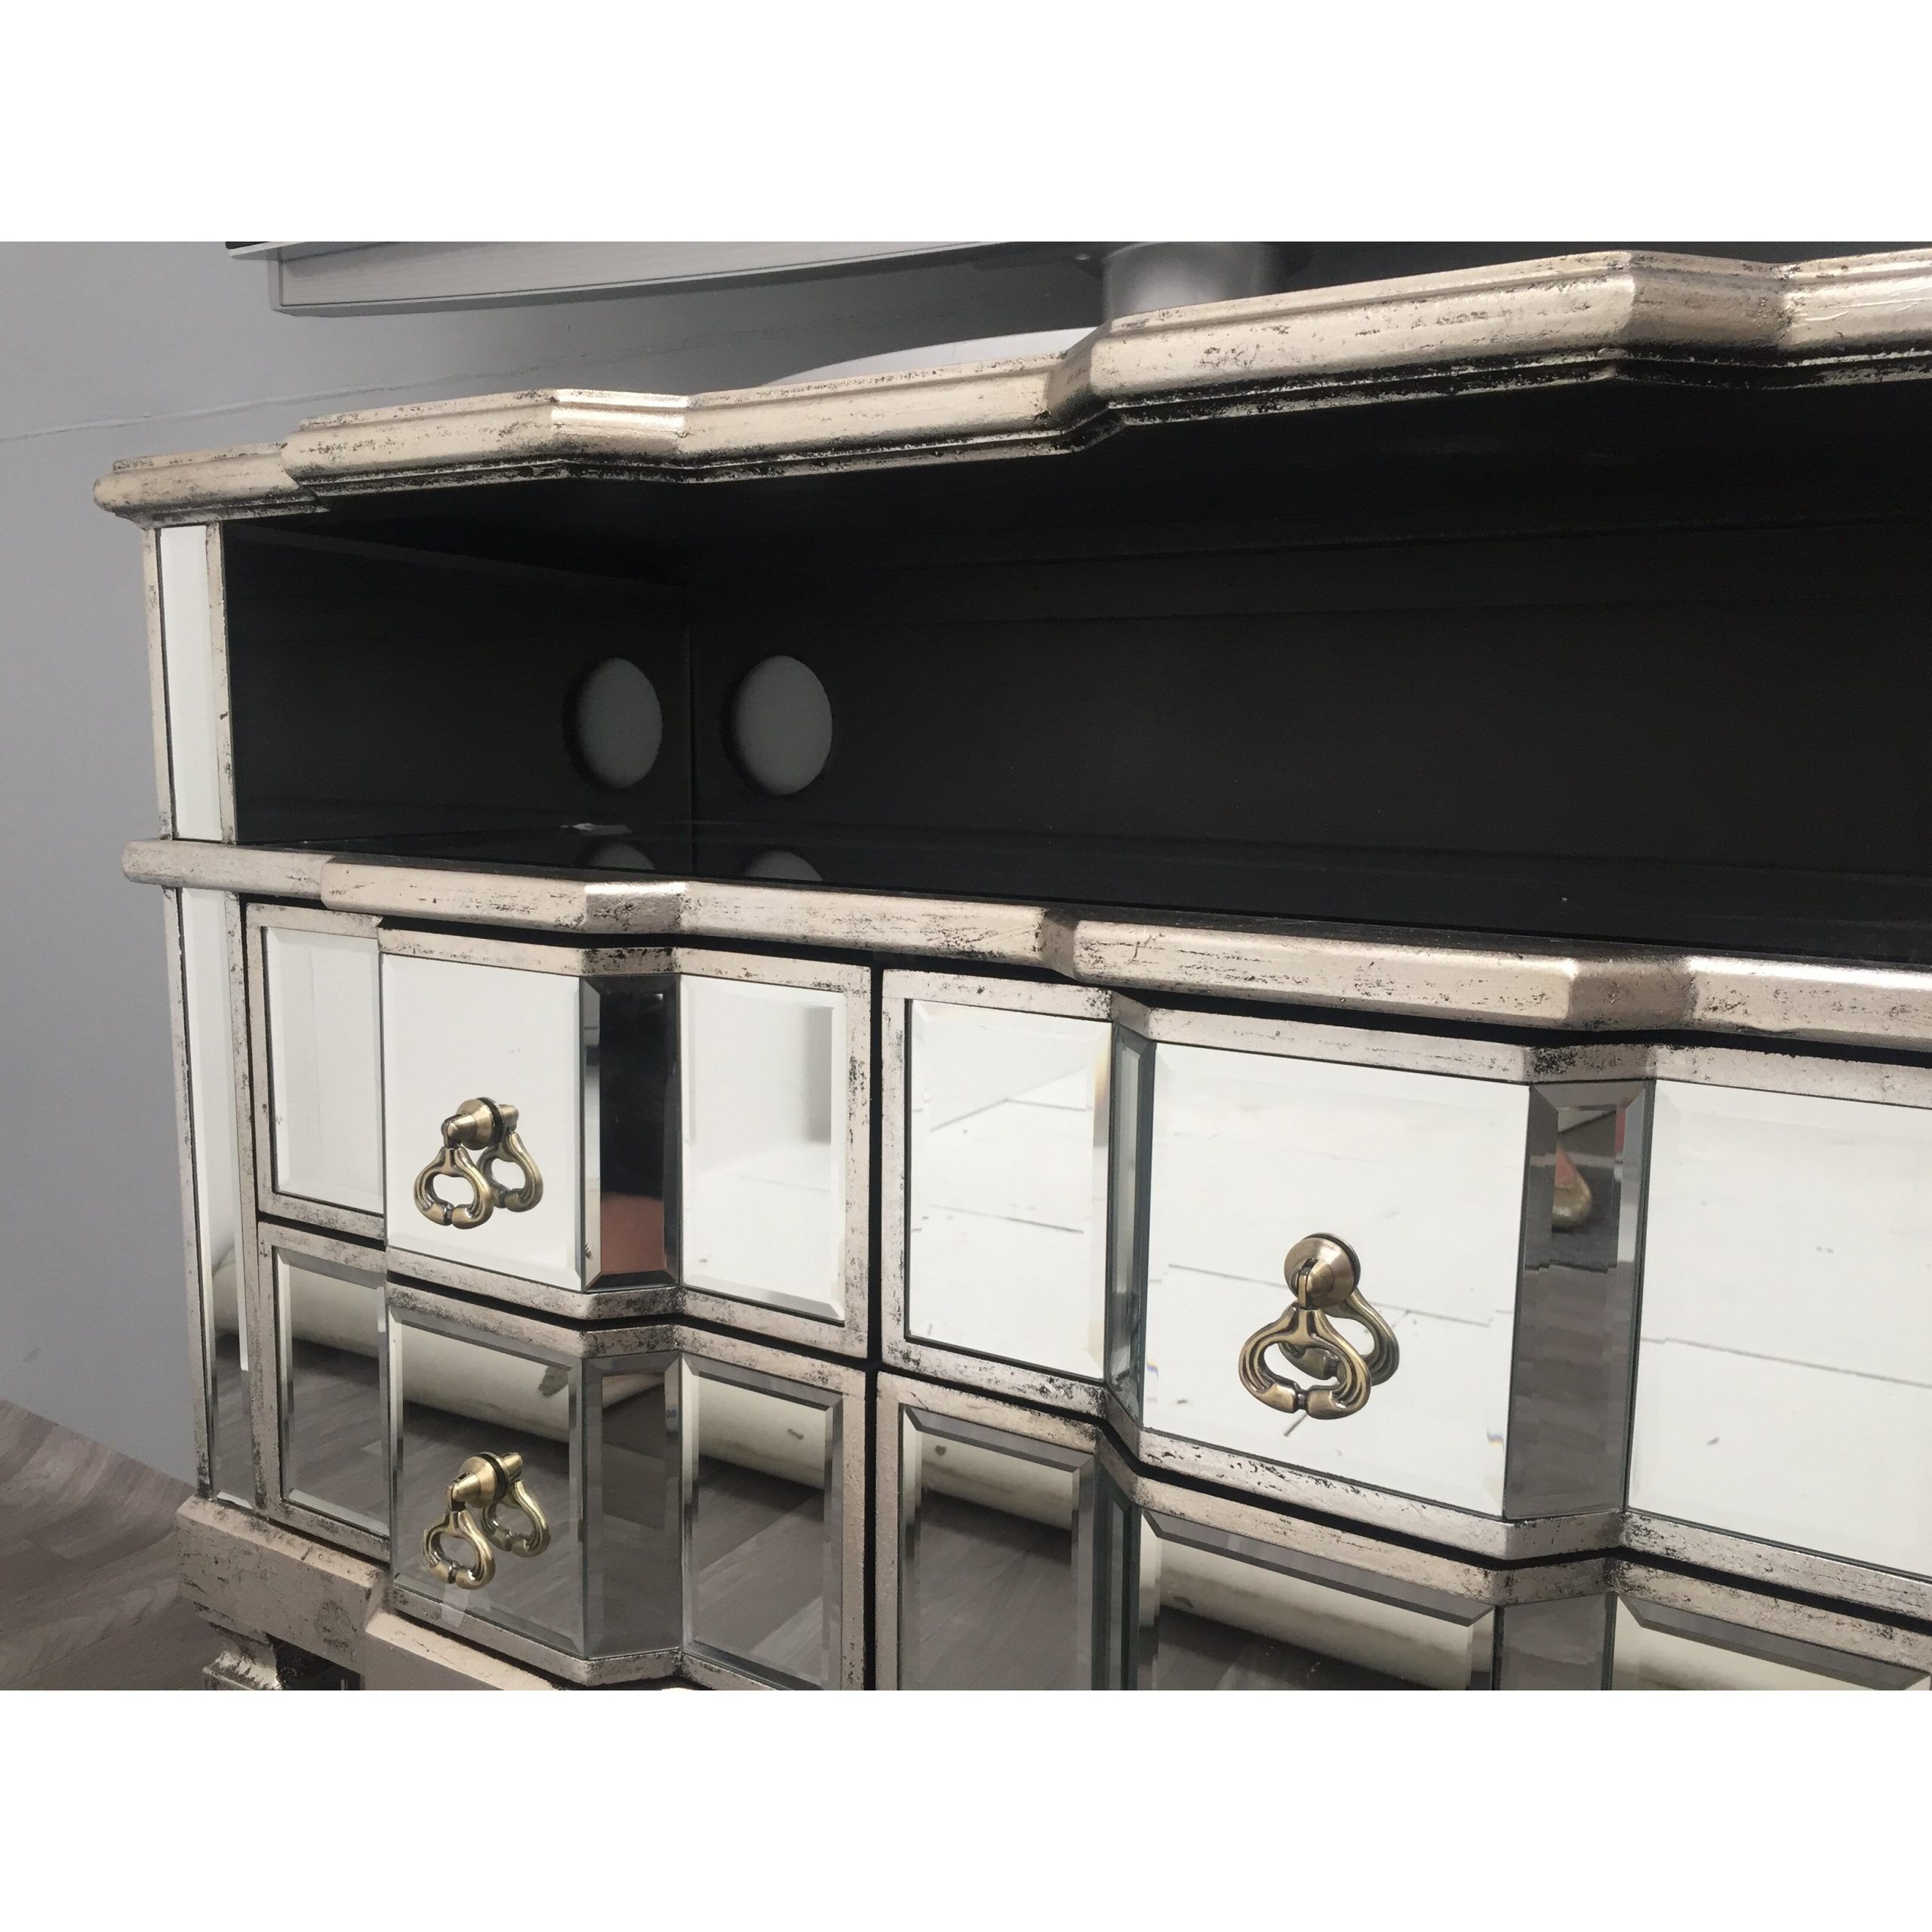 Alterton Vintage Mirrored Tv Cabinets & Reviews | Wayfair Pertaining To Mirrored Tv Cabinets Furniture (View 4 of 15)